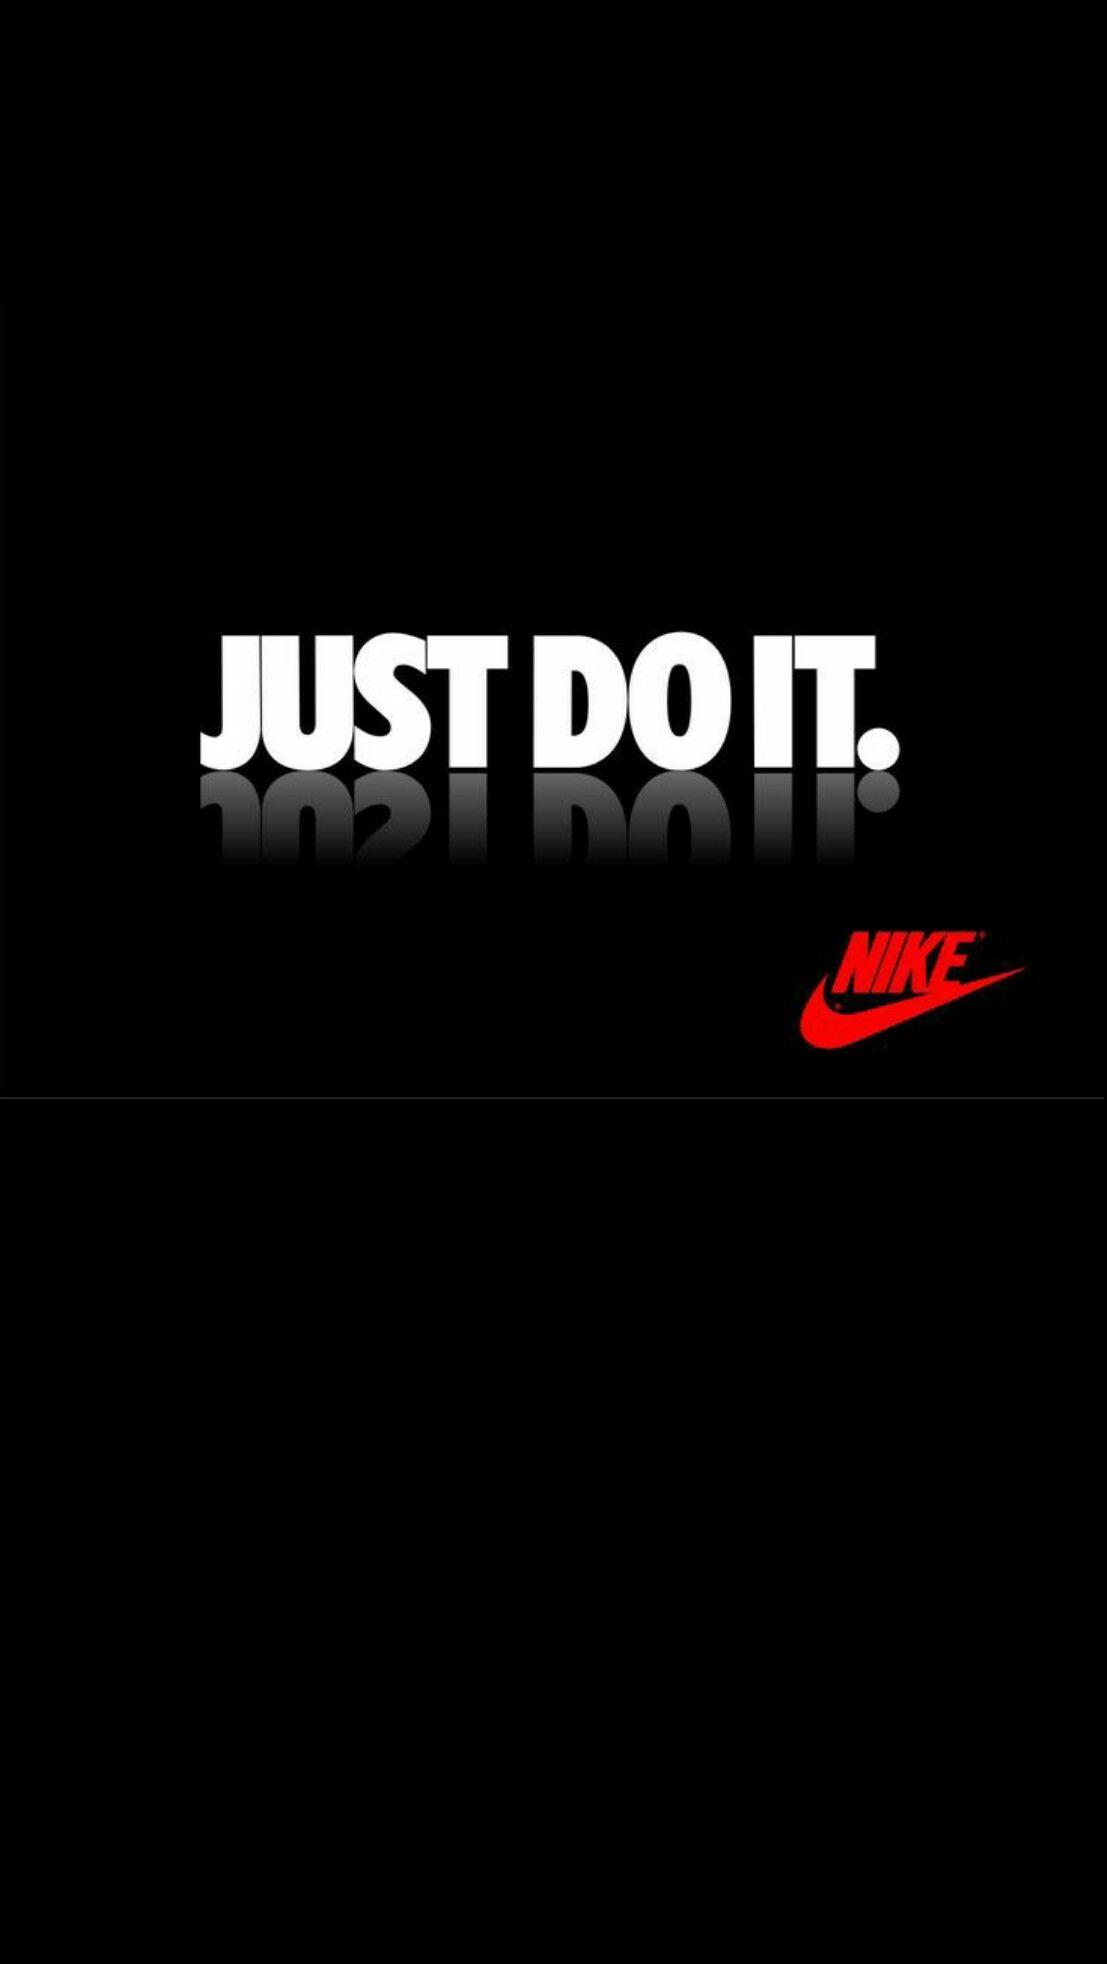 Nike Black Wallpaper iPhone Android Adidas